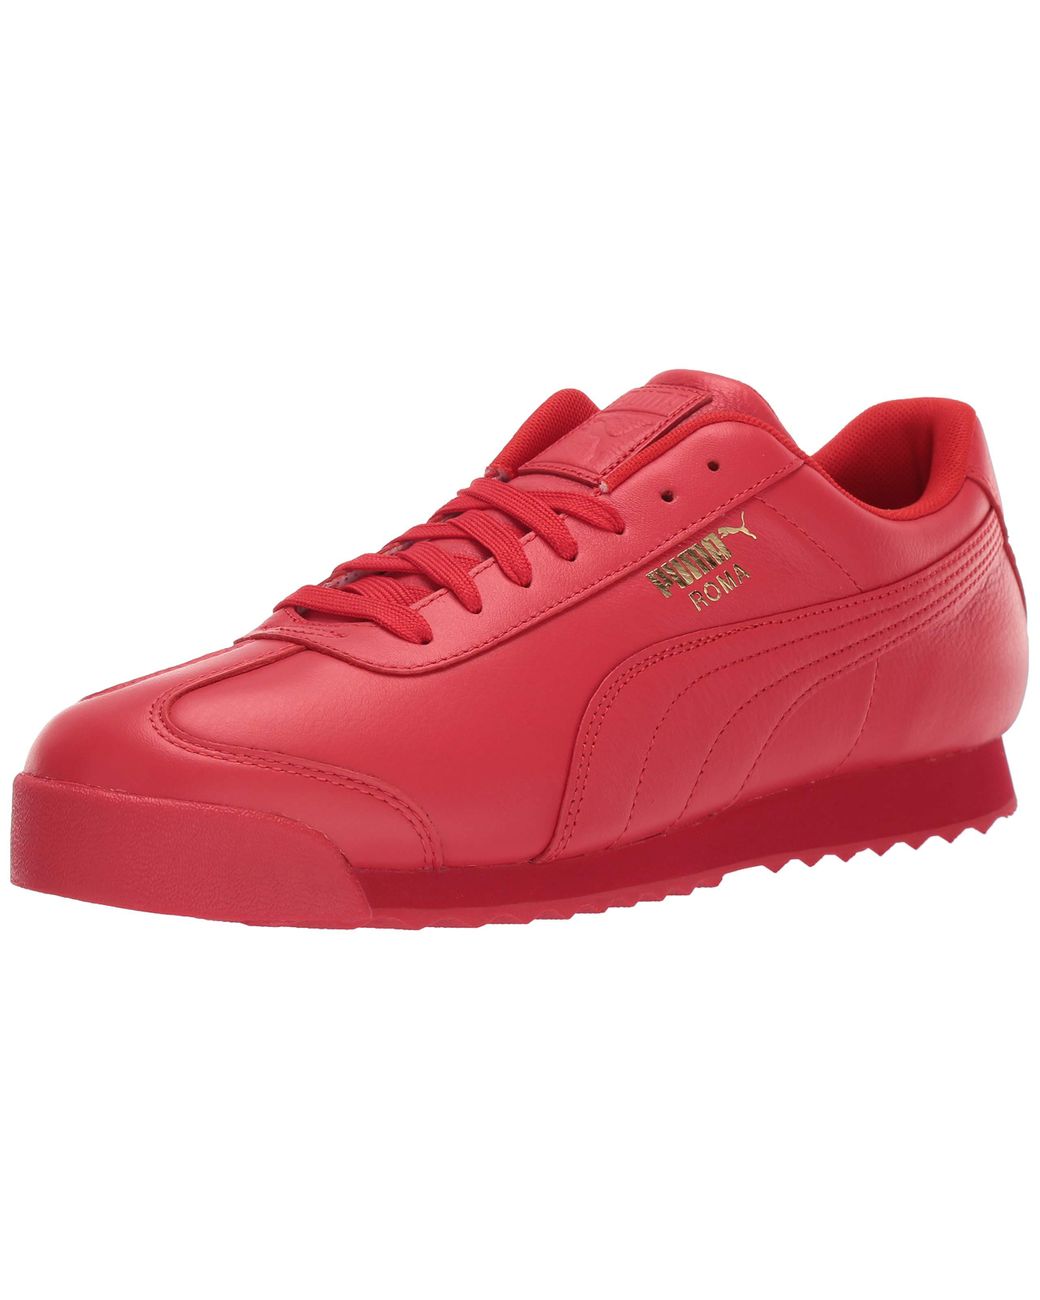 PUMA Roma Basic Sneaker in Red - Save 24% - Lyst